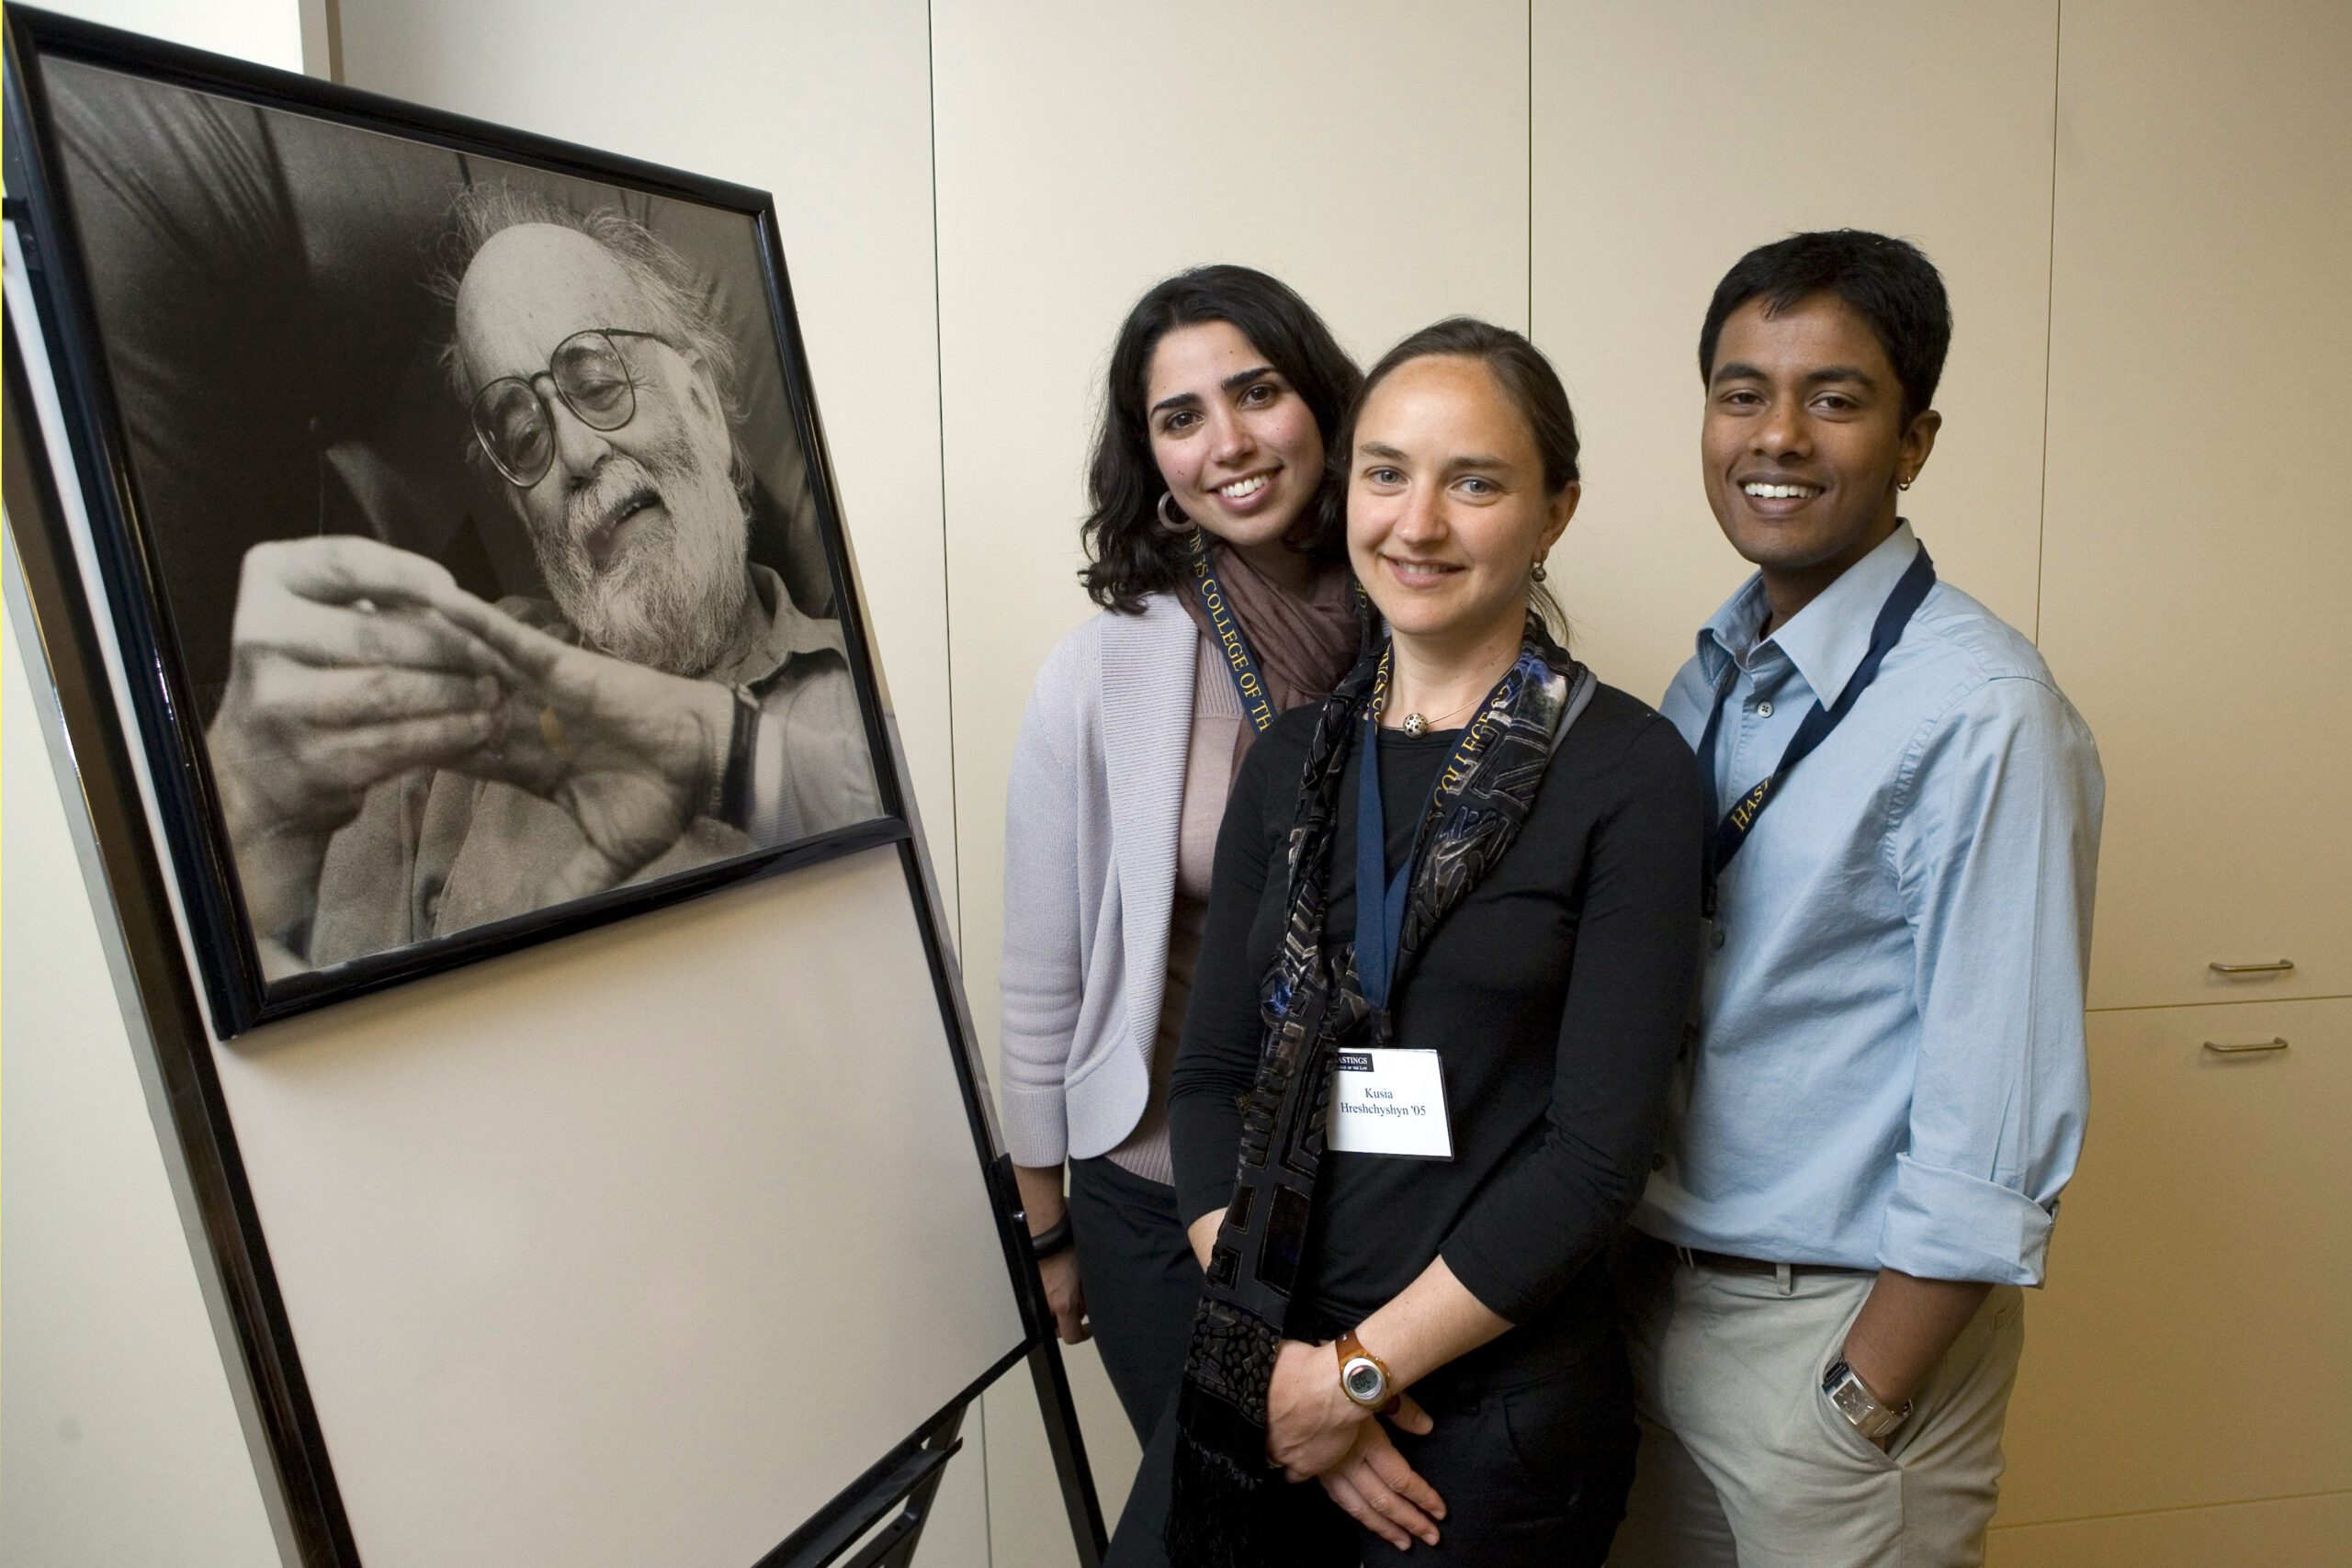 Abascal fellows pose next to a picture of Abascal